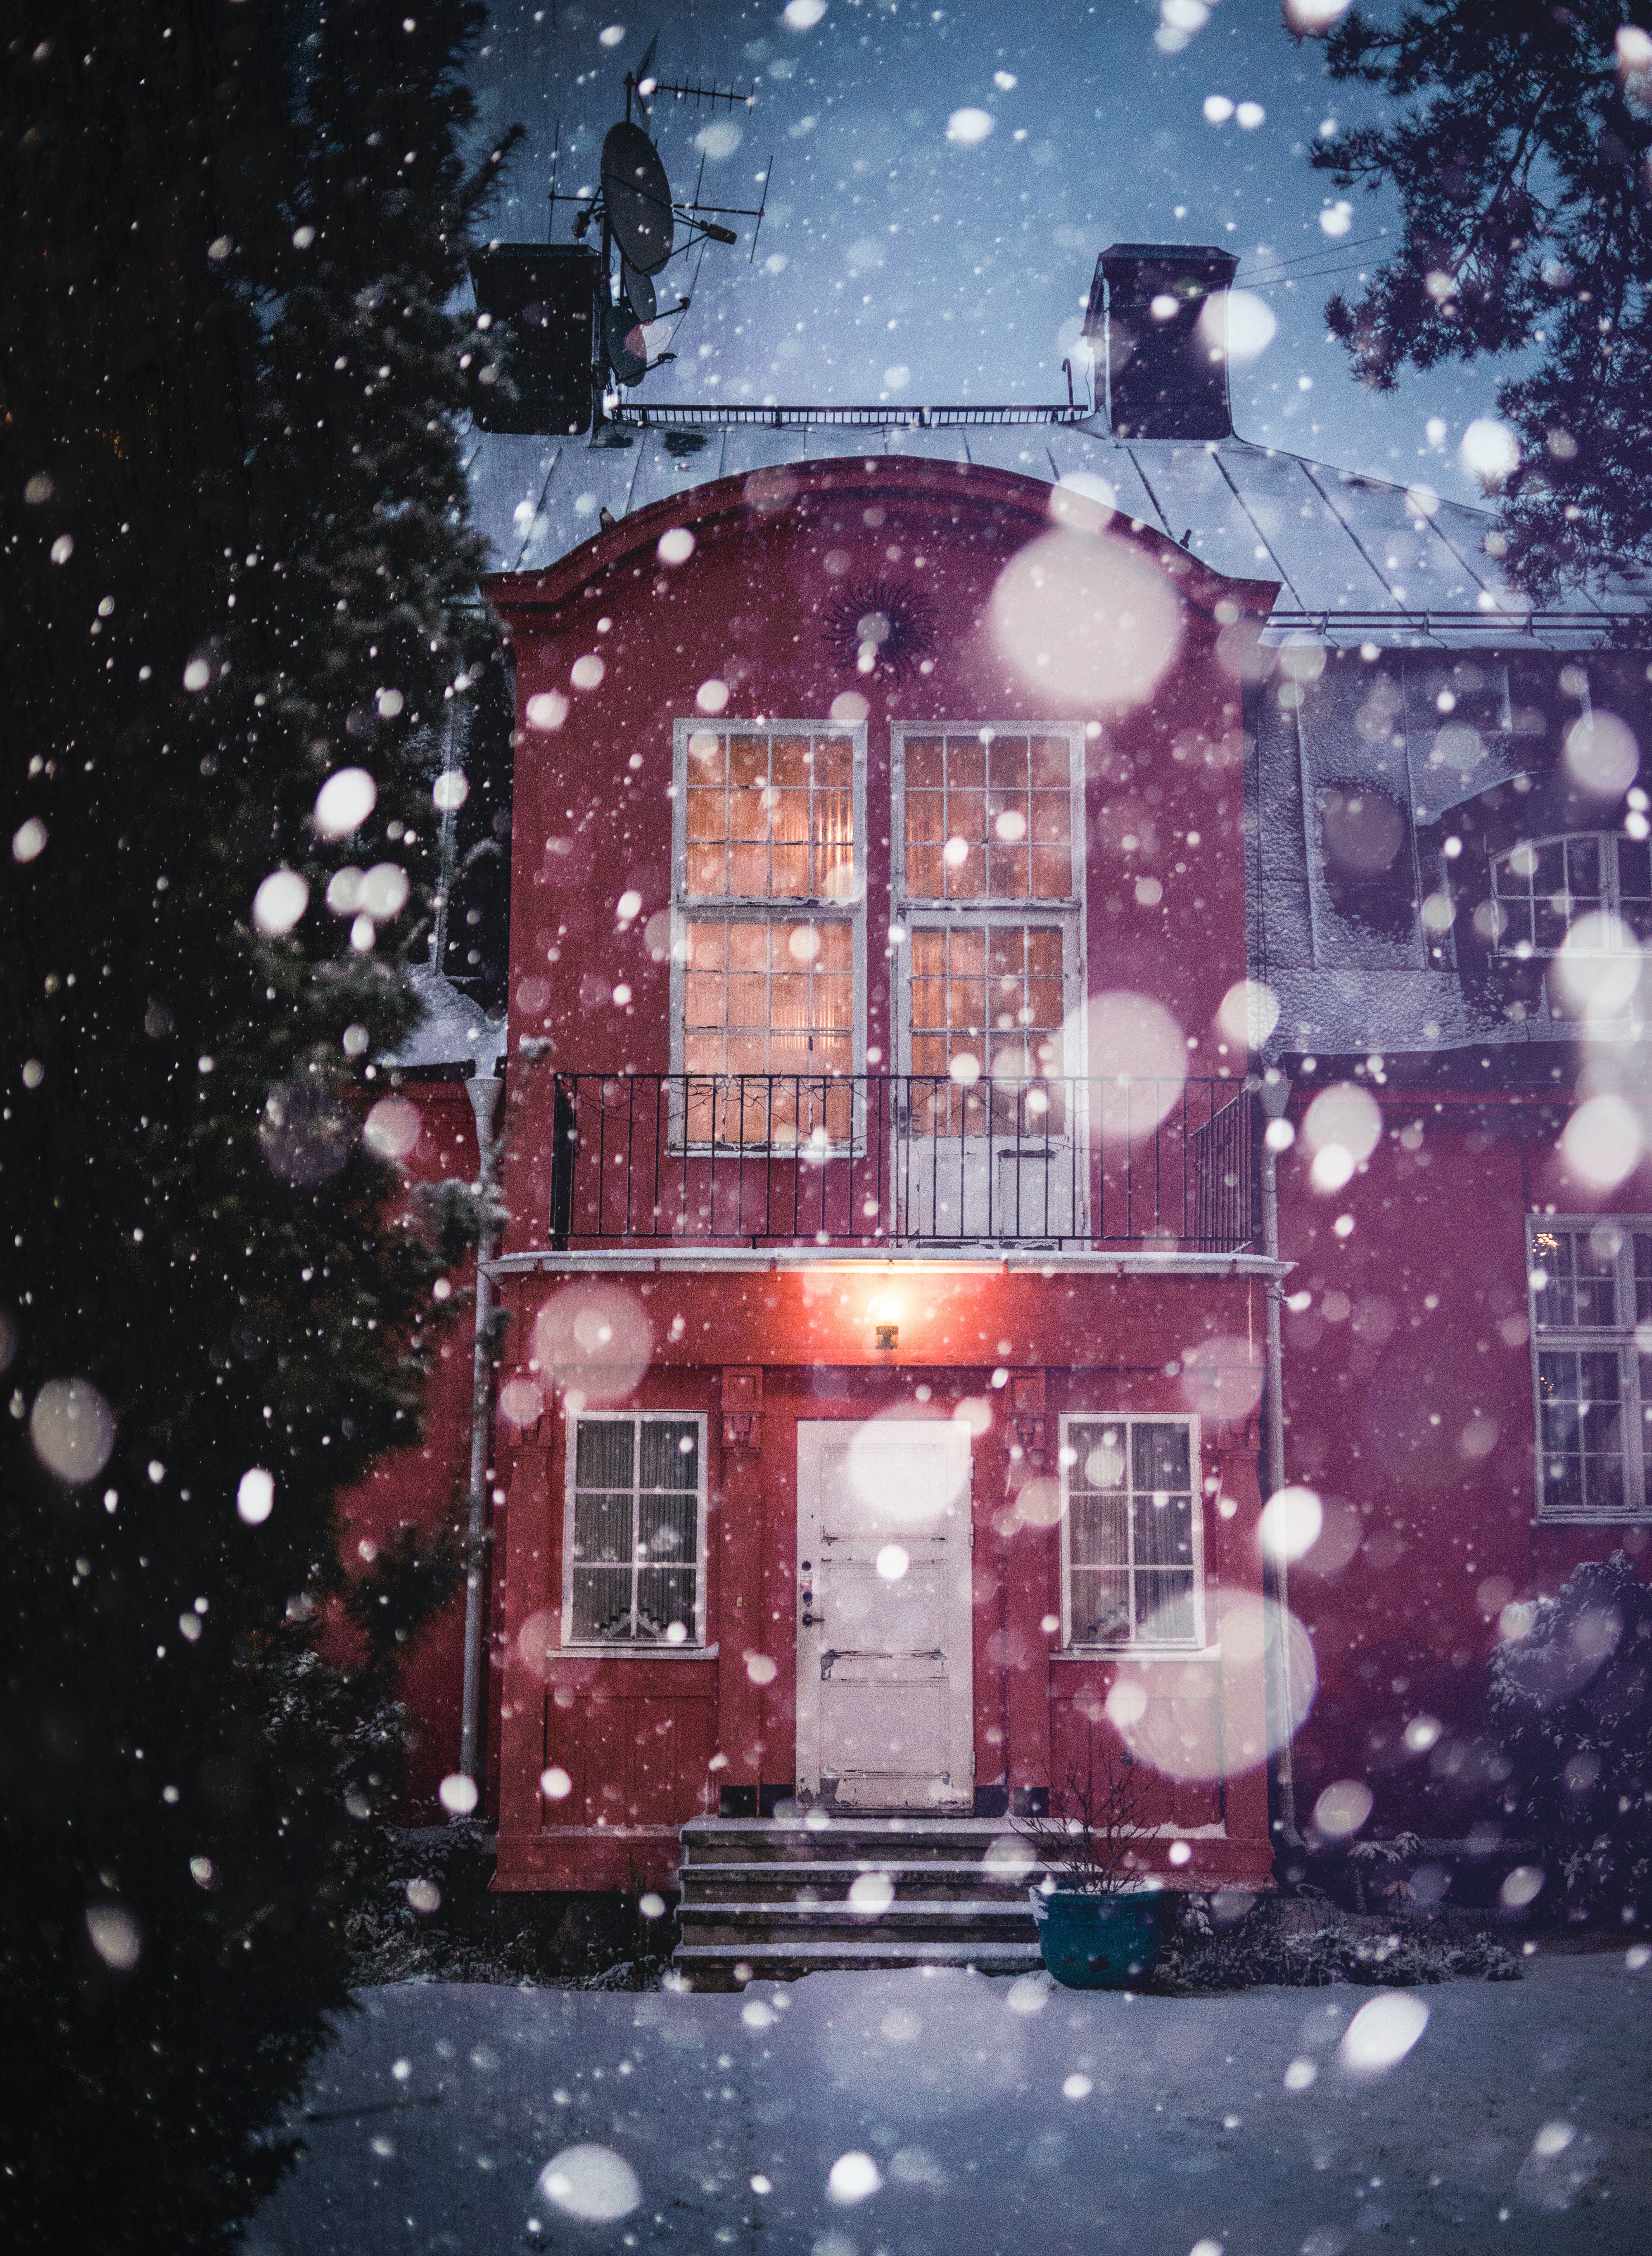 Download wallpaper 4000x5463 house, building, snow, winter, snowfall hd  background